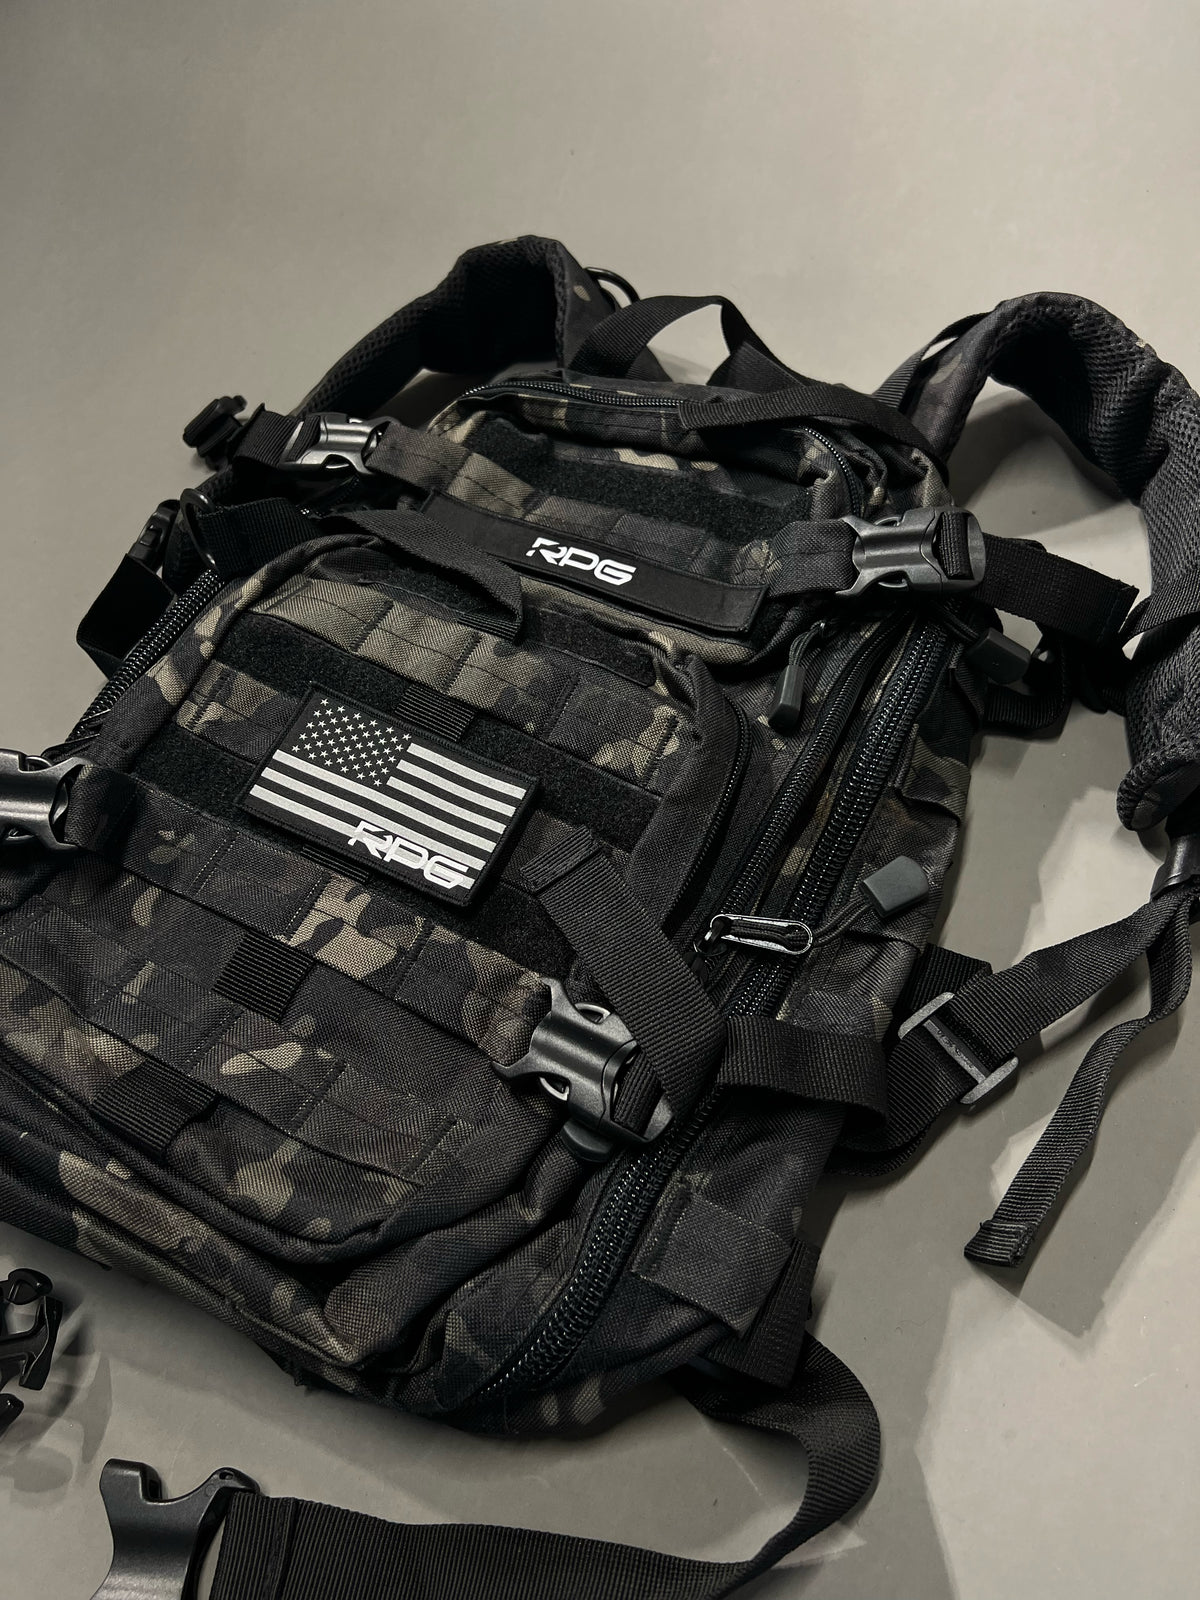 RPG SMALL ASSAULT BACKPACK (BLACK CAMO)